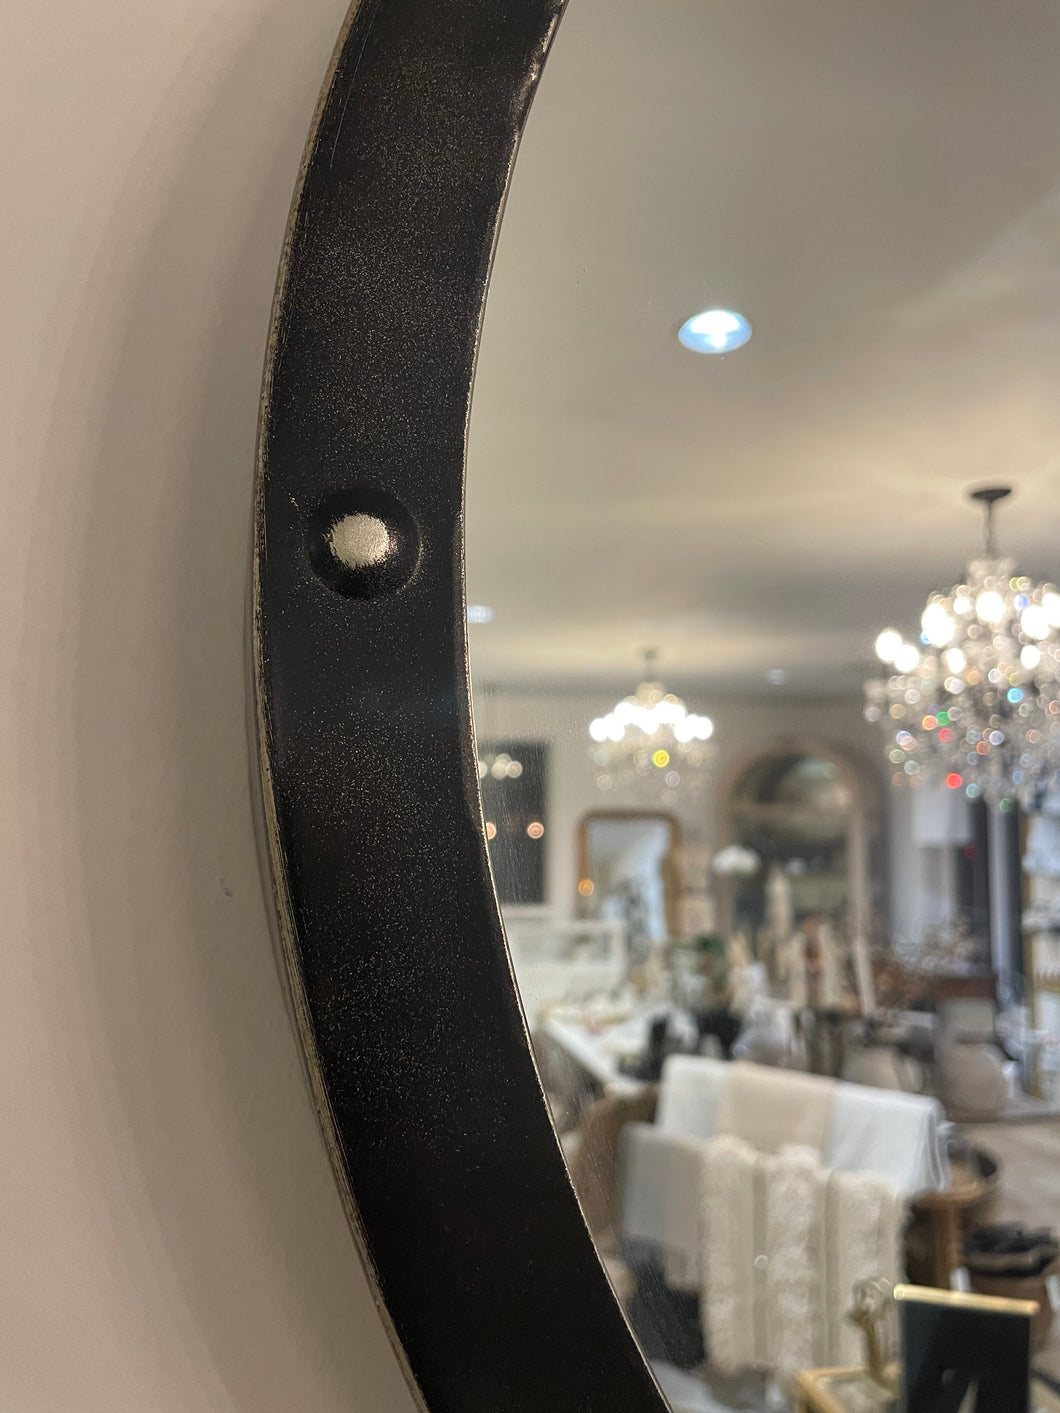 Preowned Round Mirror